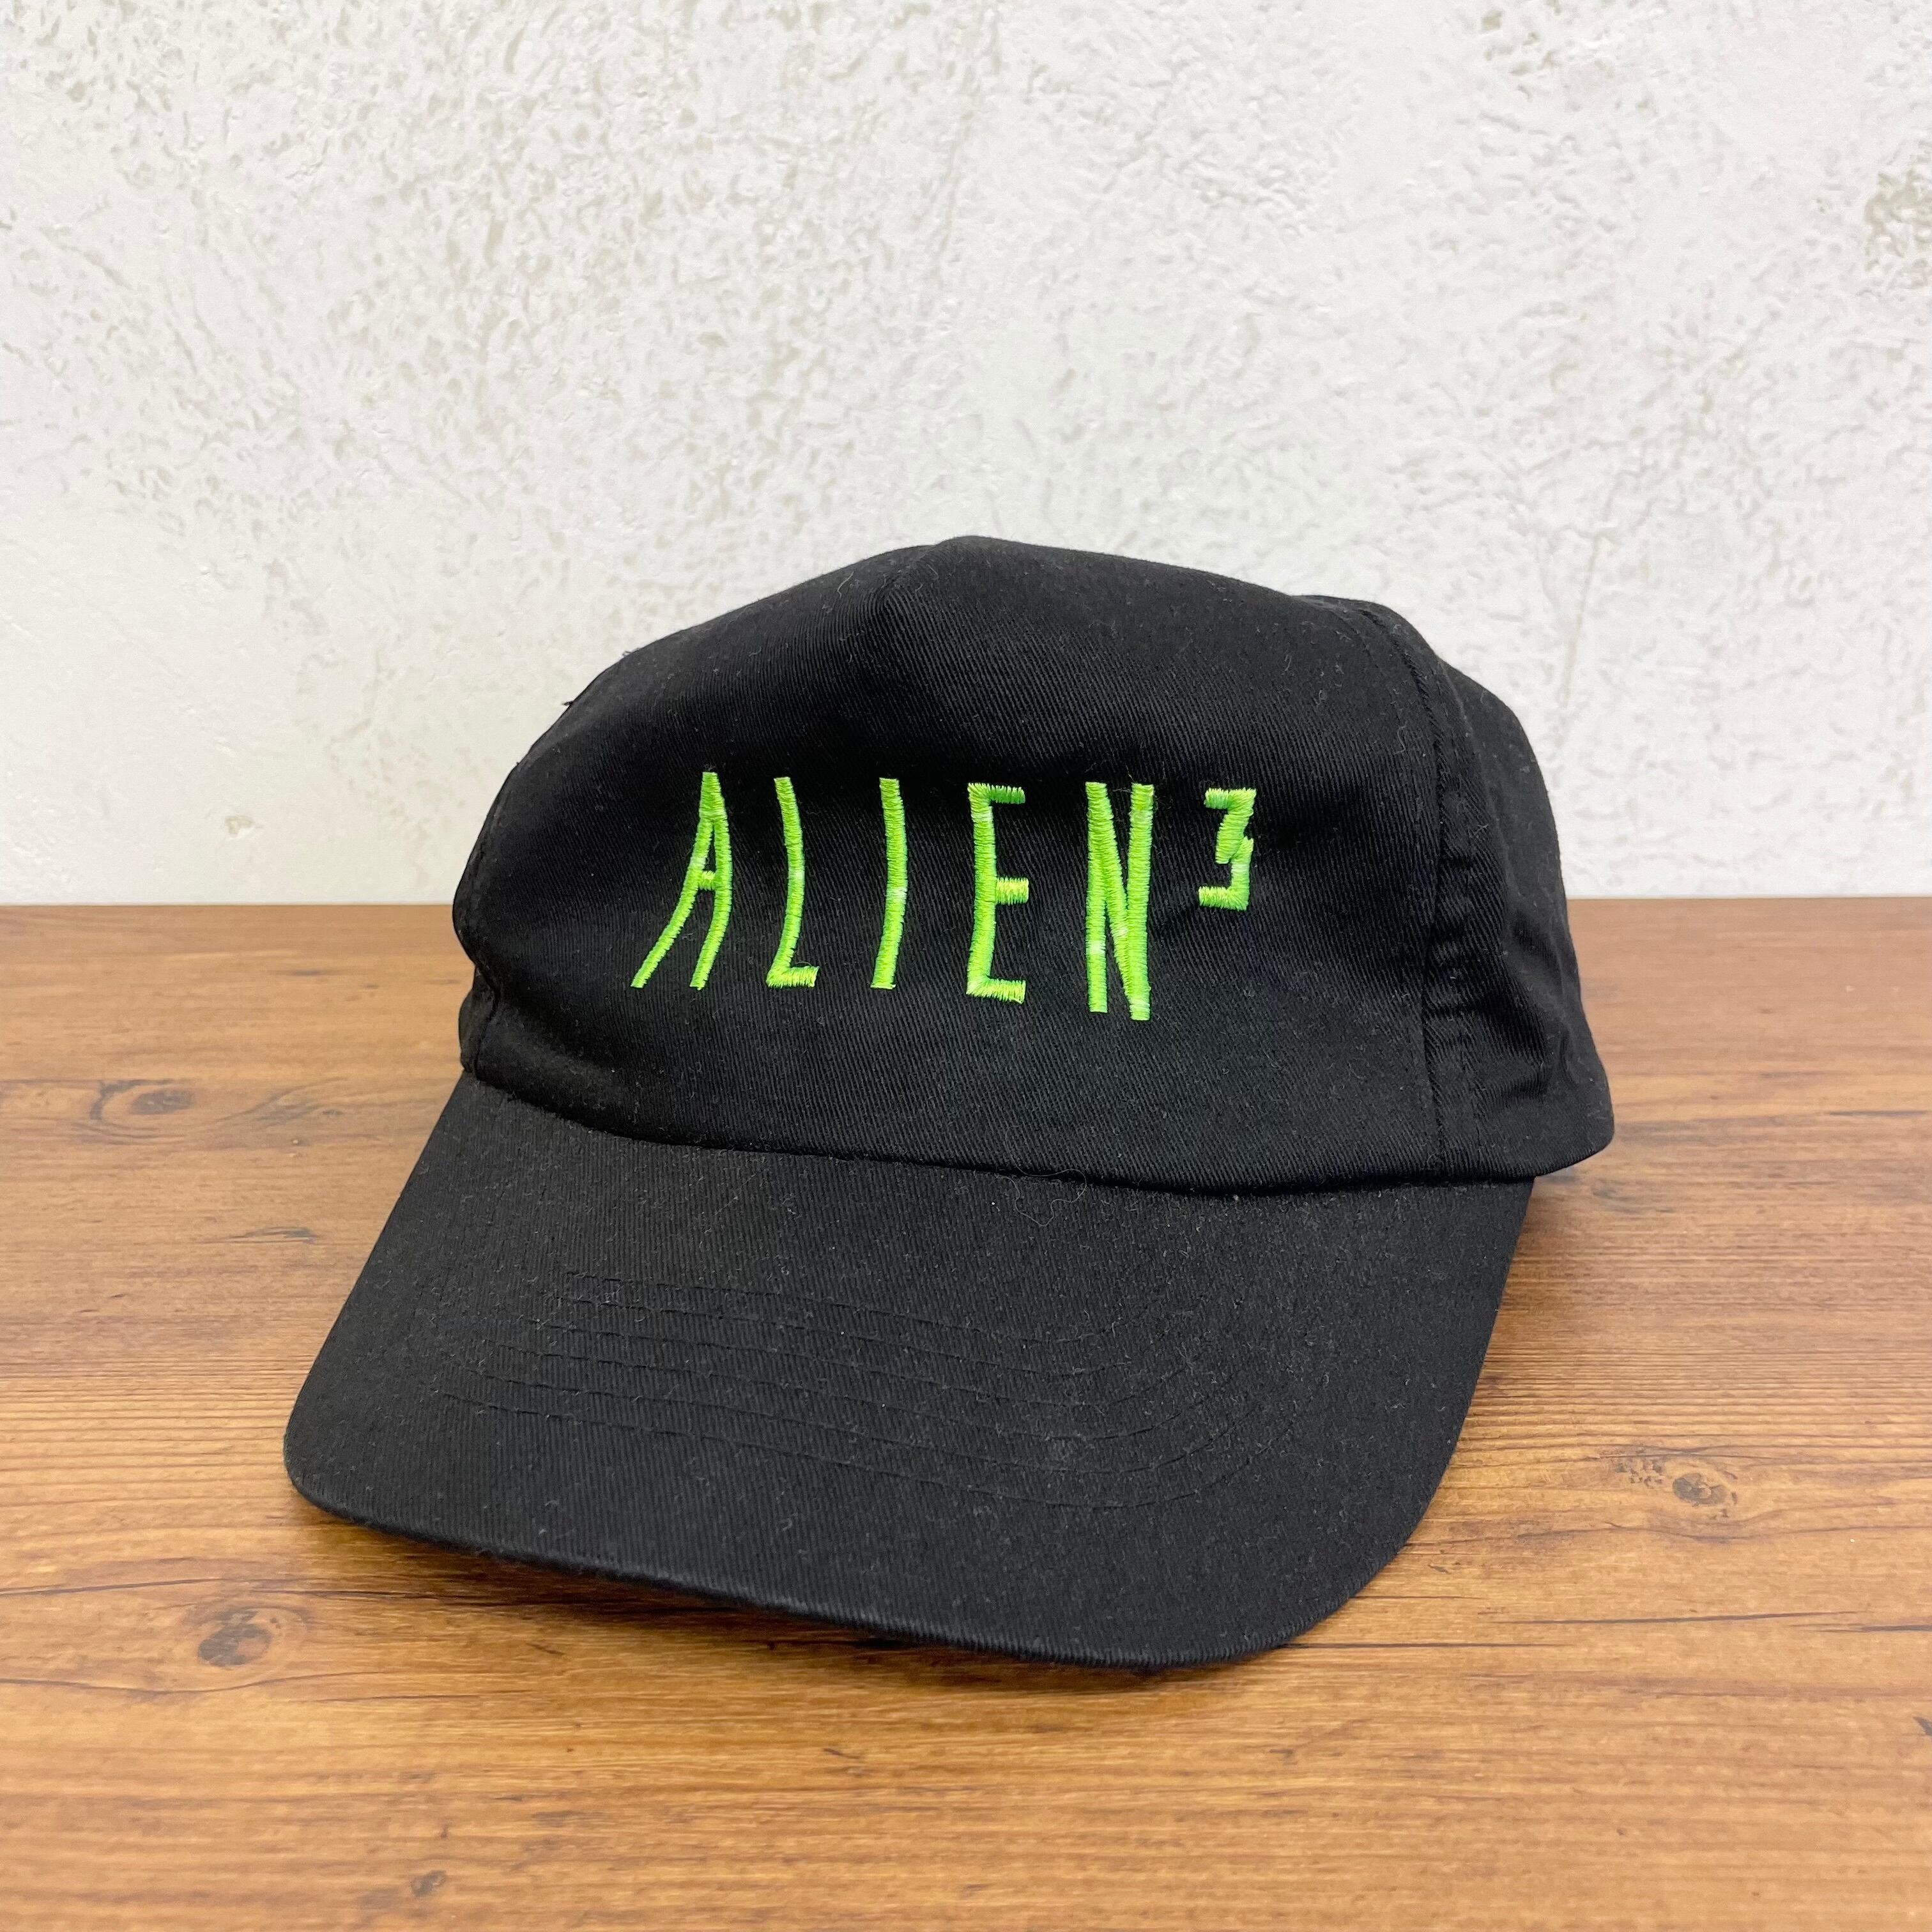 ©︎1992 ALIEN 3 promotion Cap size/FREE エイリアン プロモーション キャップ | ANY powered by  BASE